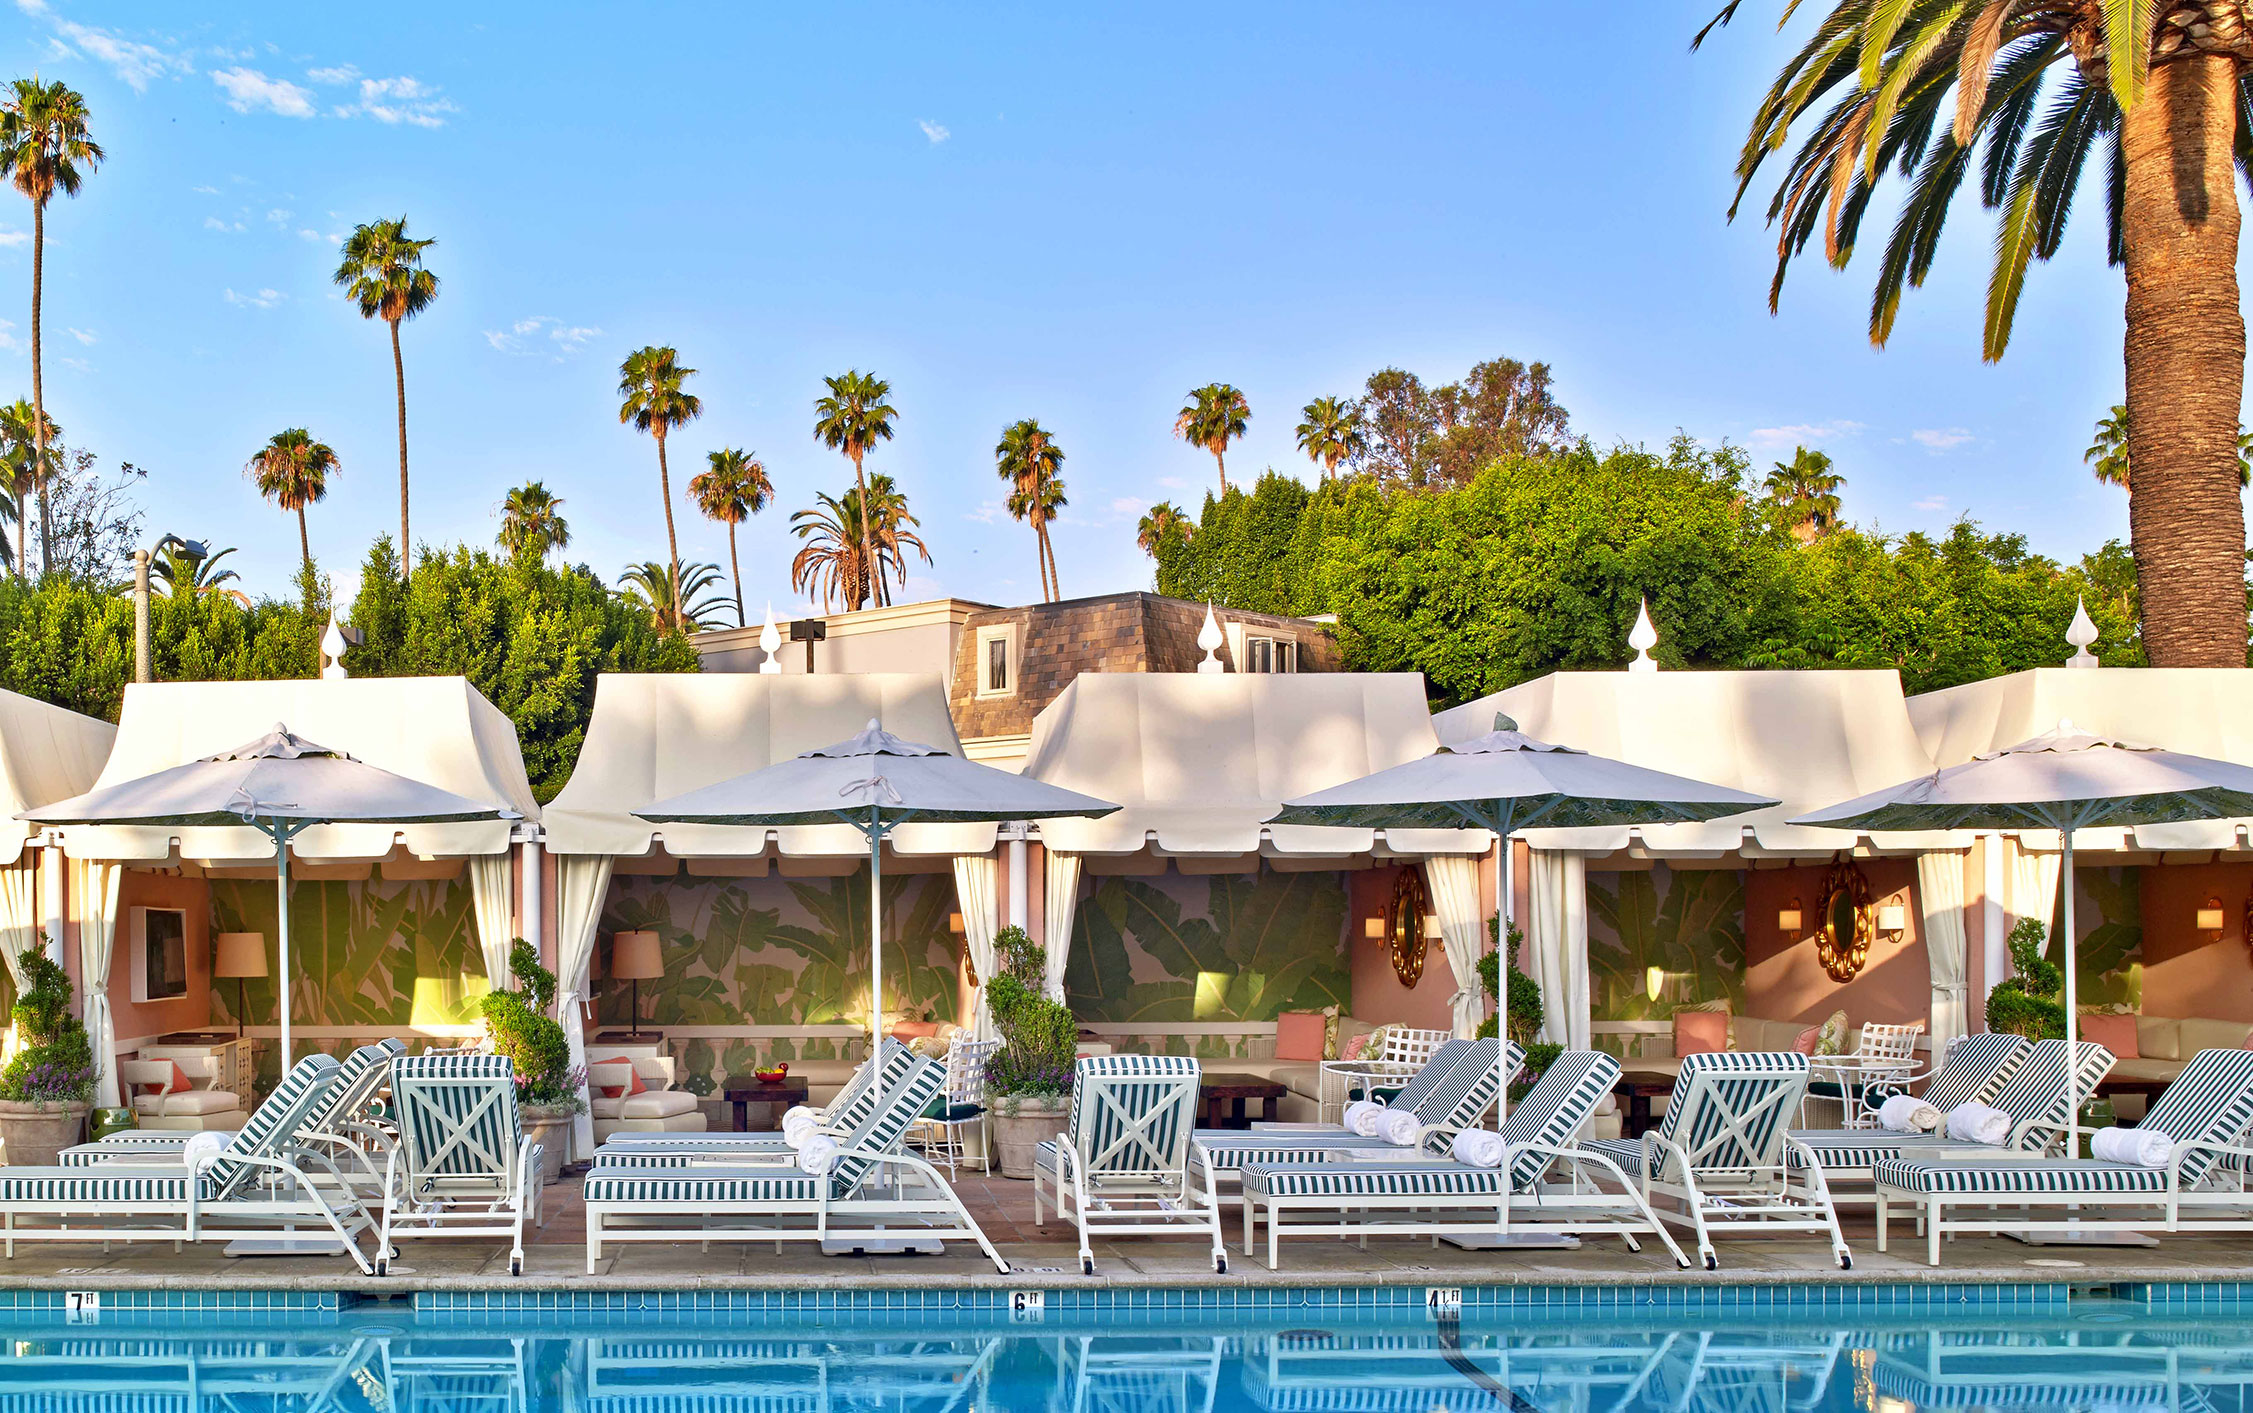 Tihany Design - The Beverly Hills Hotel - Beverly Hills - USA